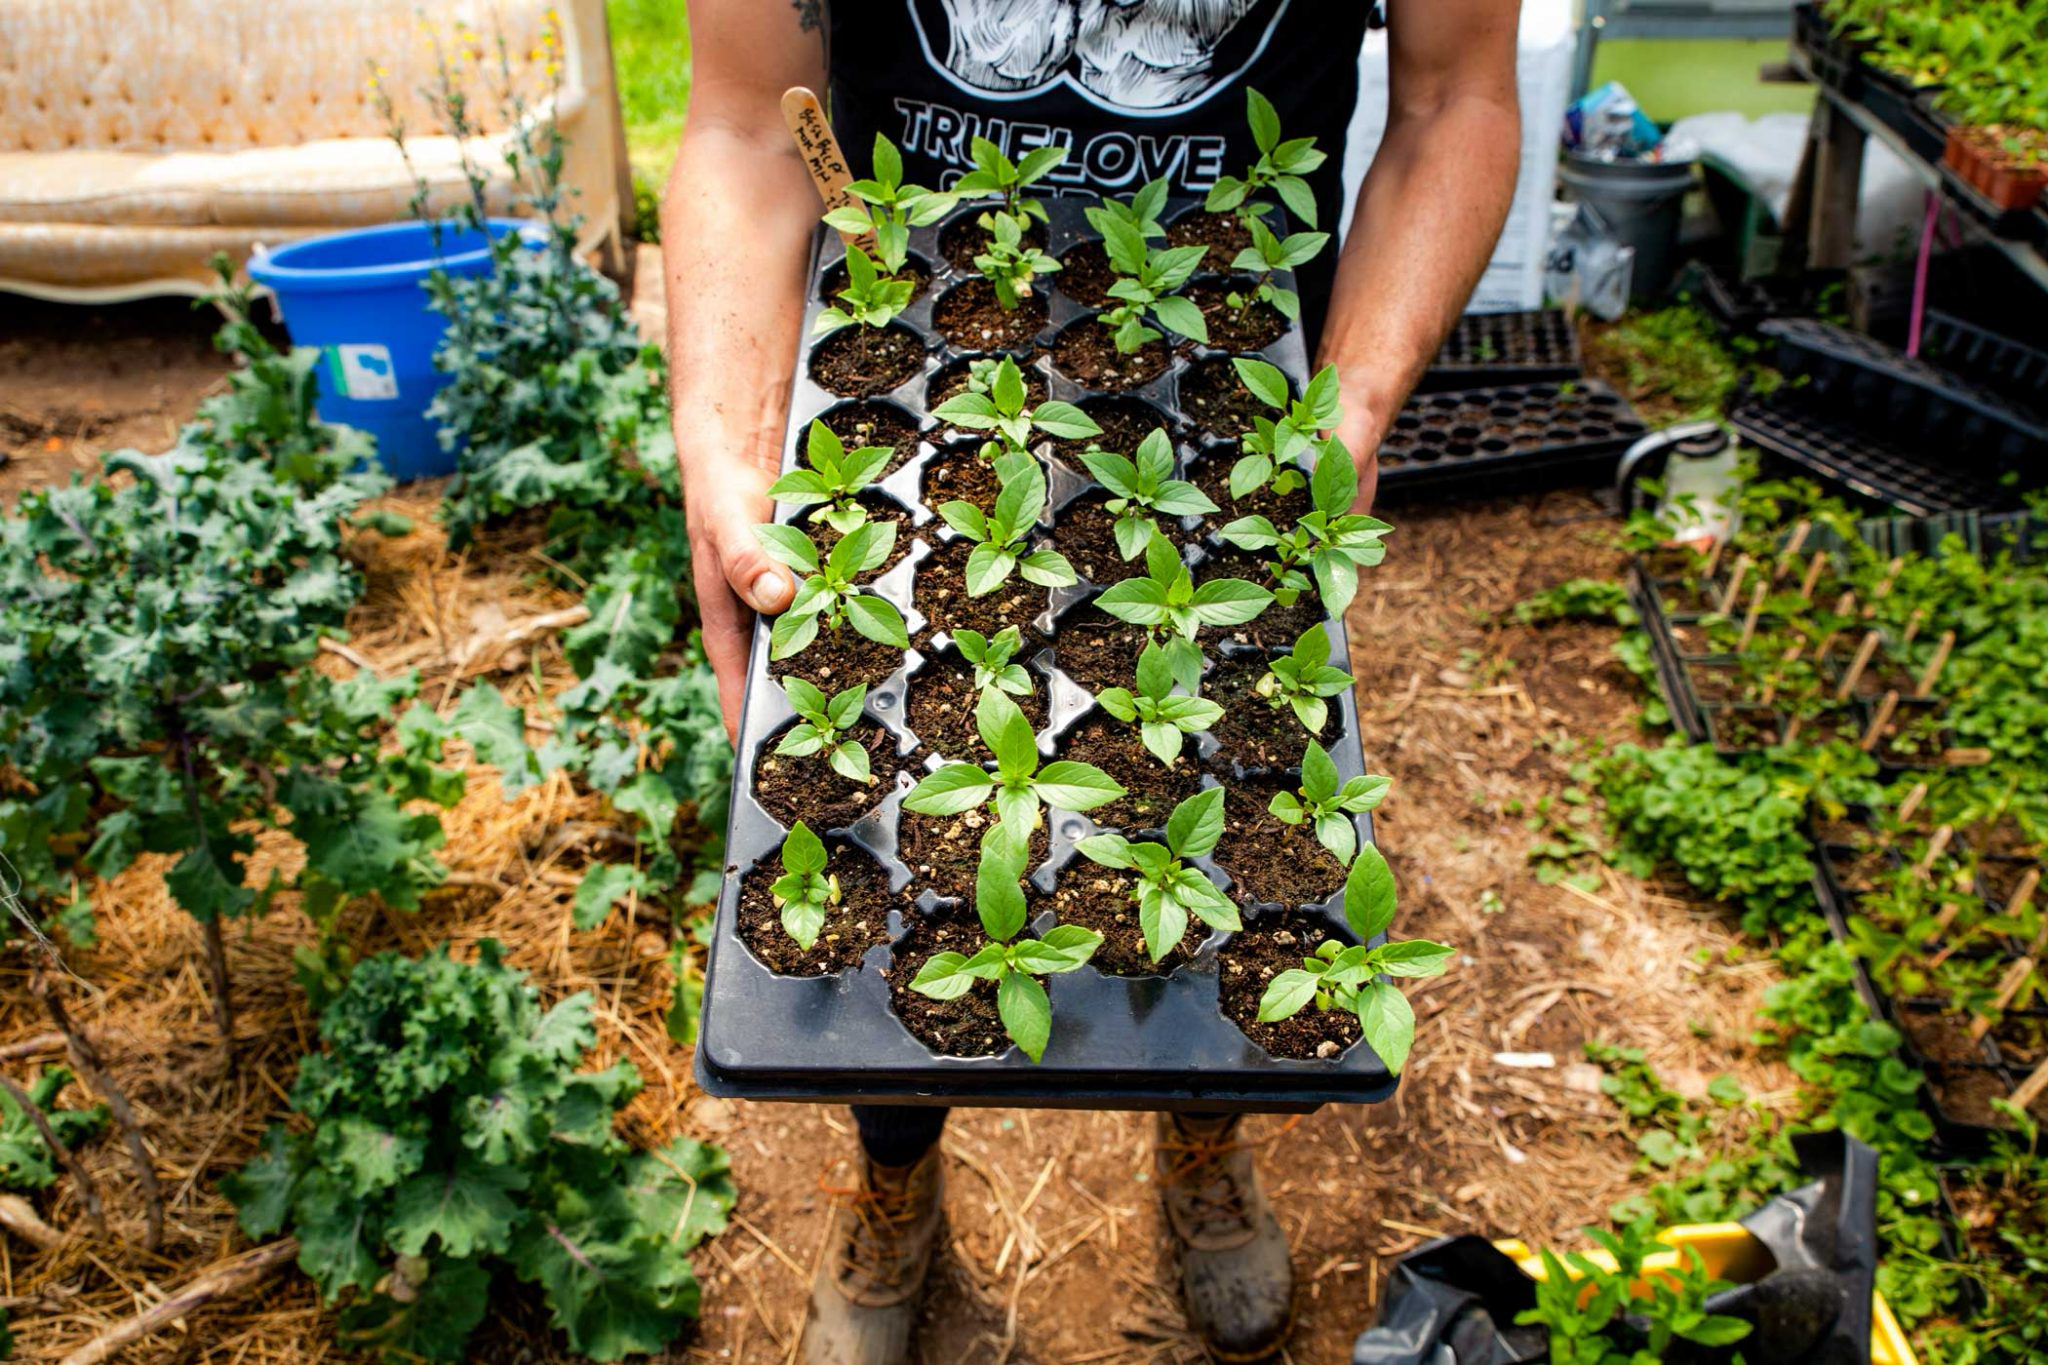 A person holding a tray of small budding plants.